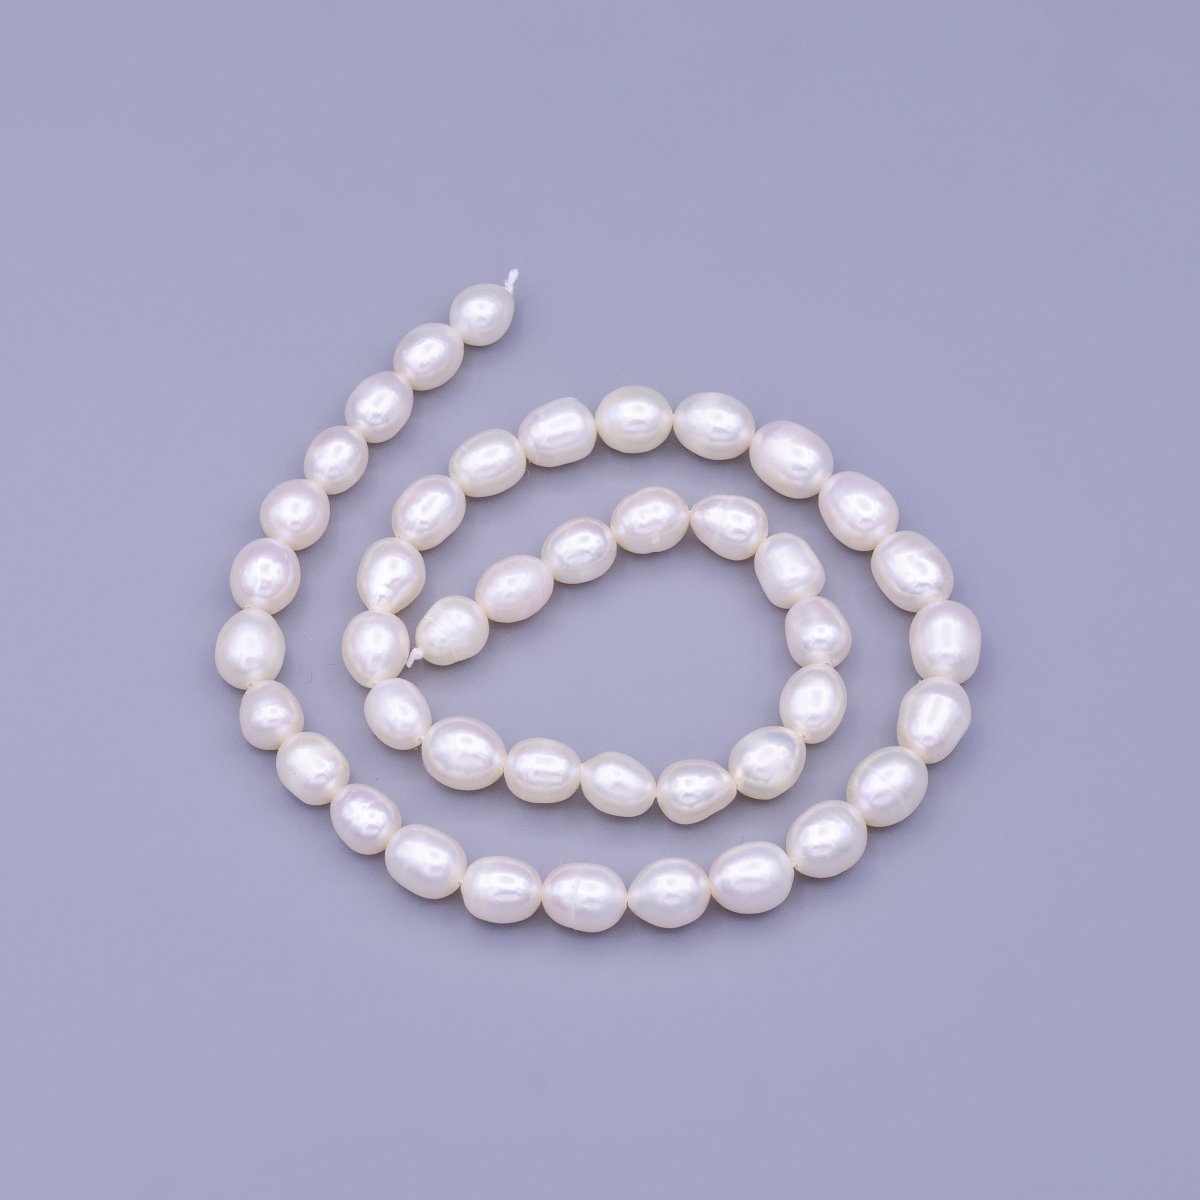 7mm Ringed Oval Freshwater Pearl 45 Pieces/Strand Jewelry Making Finding Supply | WA-1666 Clearance Pricing - DLUXCA